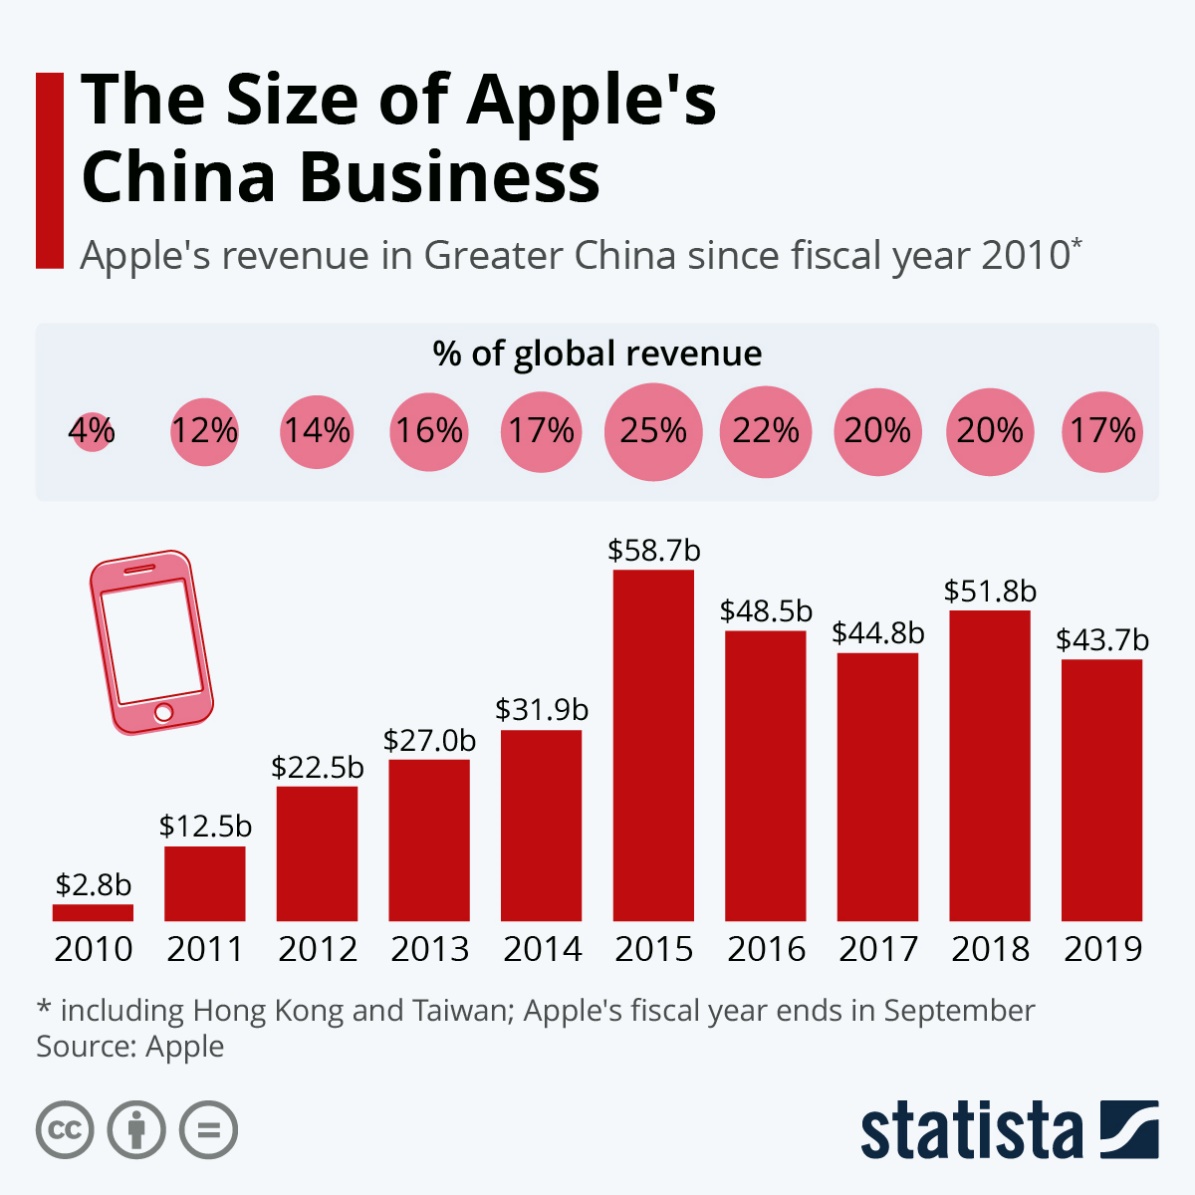 The size of Apple's China business 